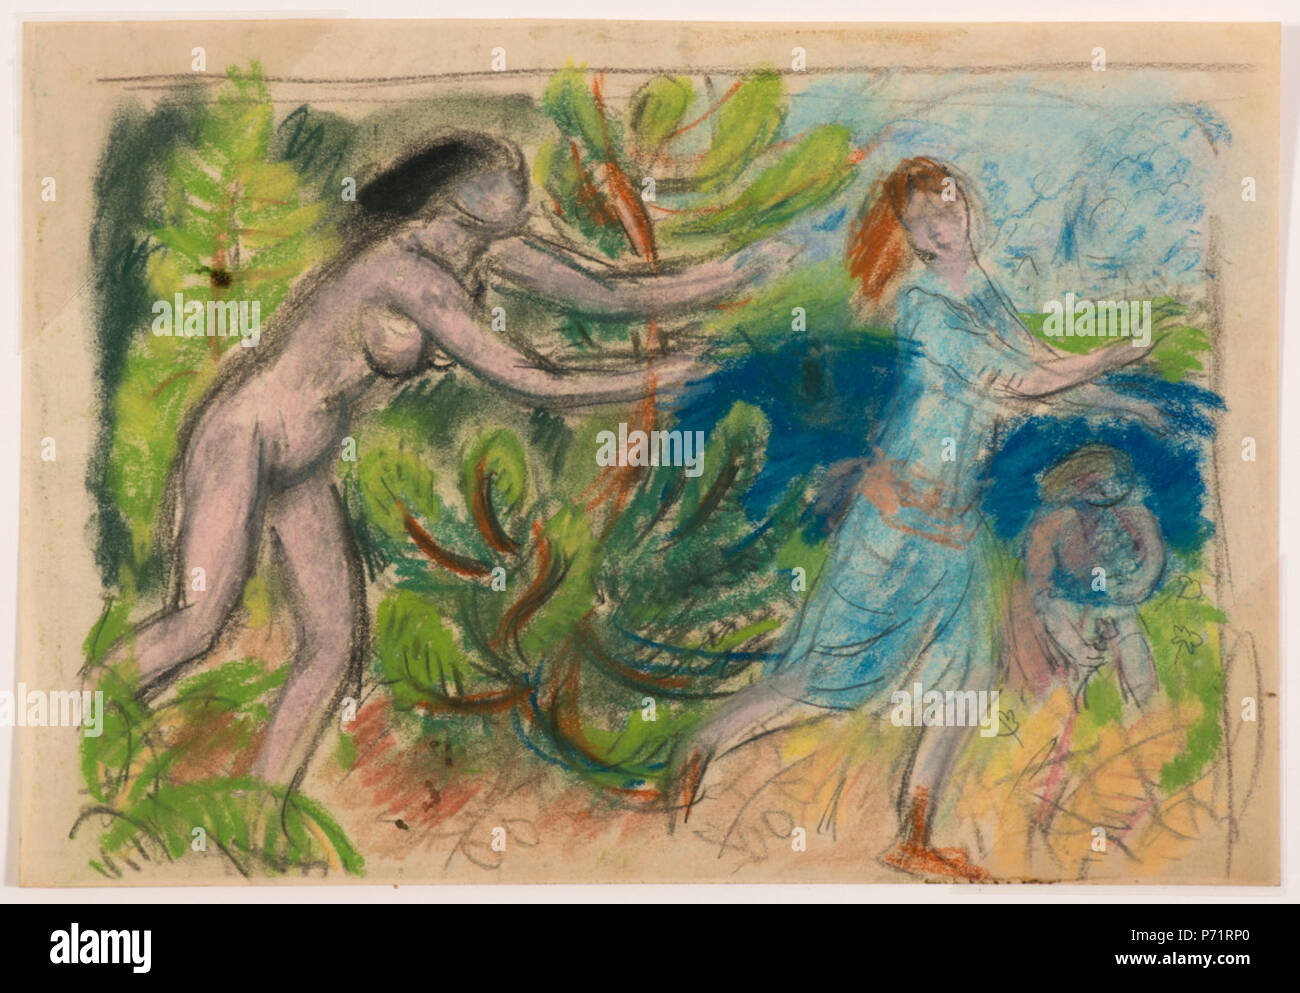 English: Drawing by William Glackens, Museum of Art Fort Lauderdale, accession 1997-13 . 15 Drawing by William Glackens, Museum of Art Fort Lauderdale 1997-13 Stock Photo